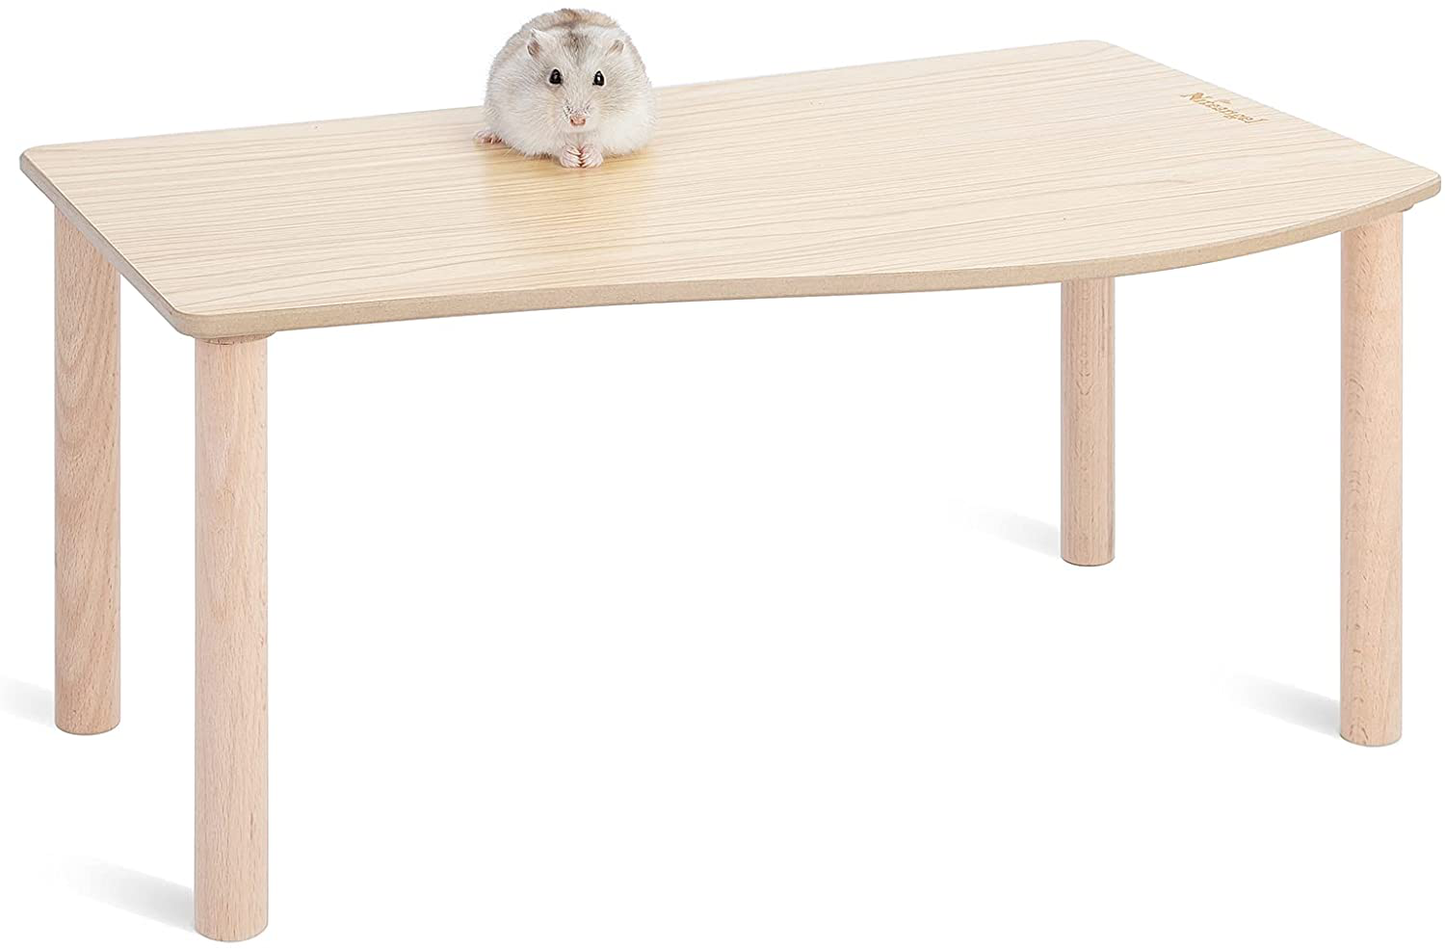 Niteangel Hamster Play Wooden Platform for Dwarf Syrian Hamsters Gerbils Mice Degus or Other Small Pets